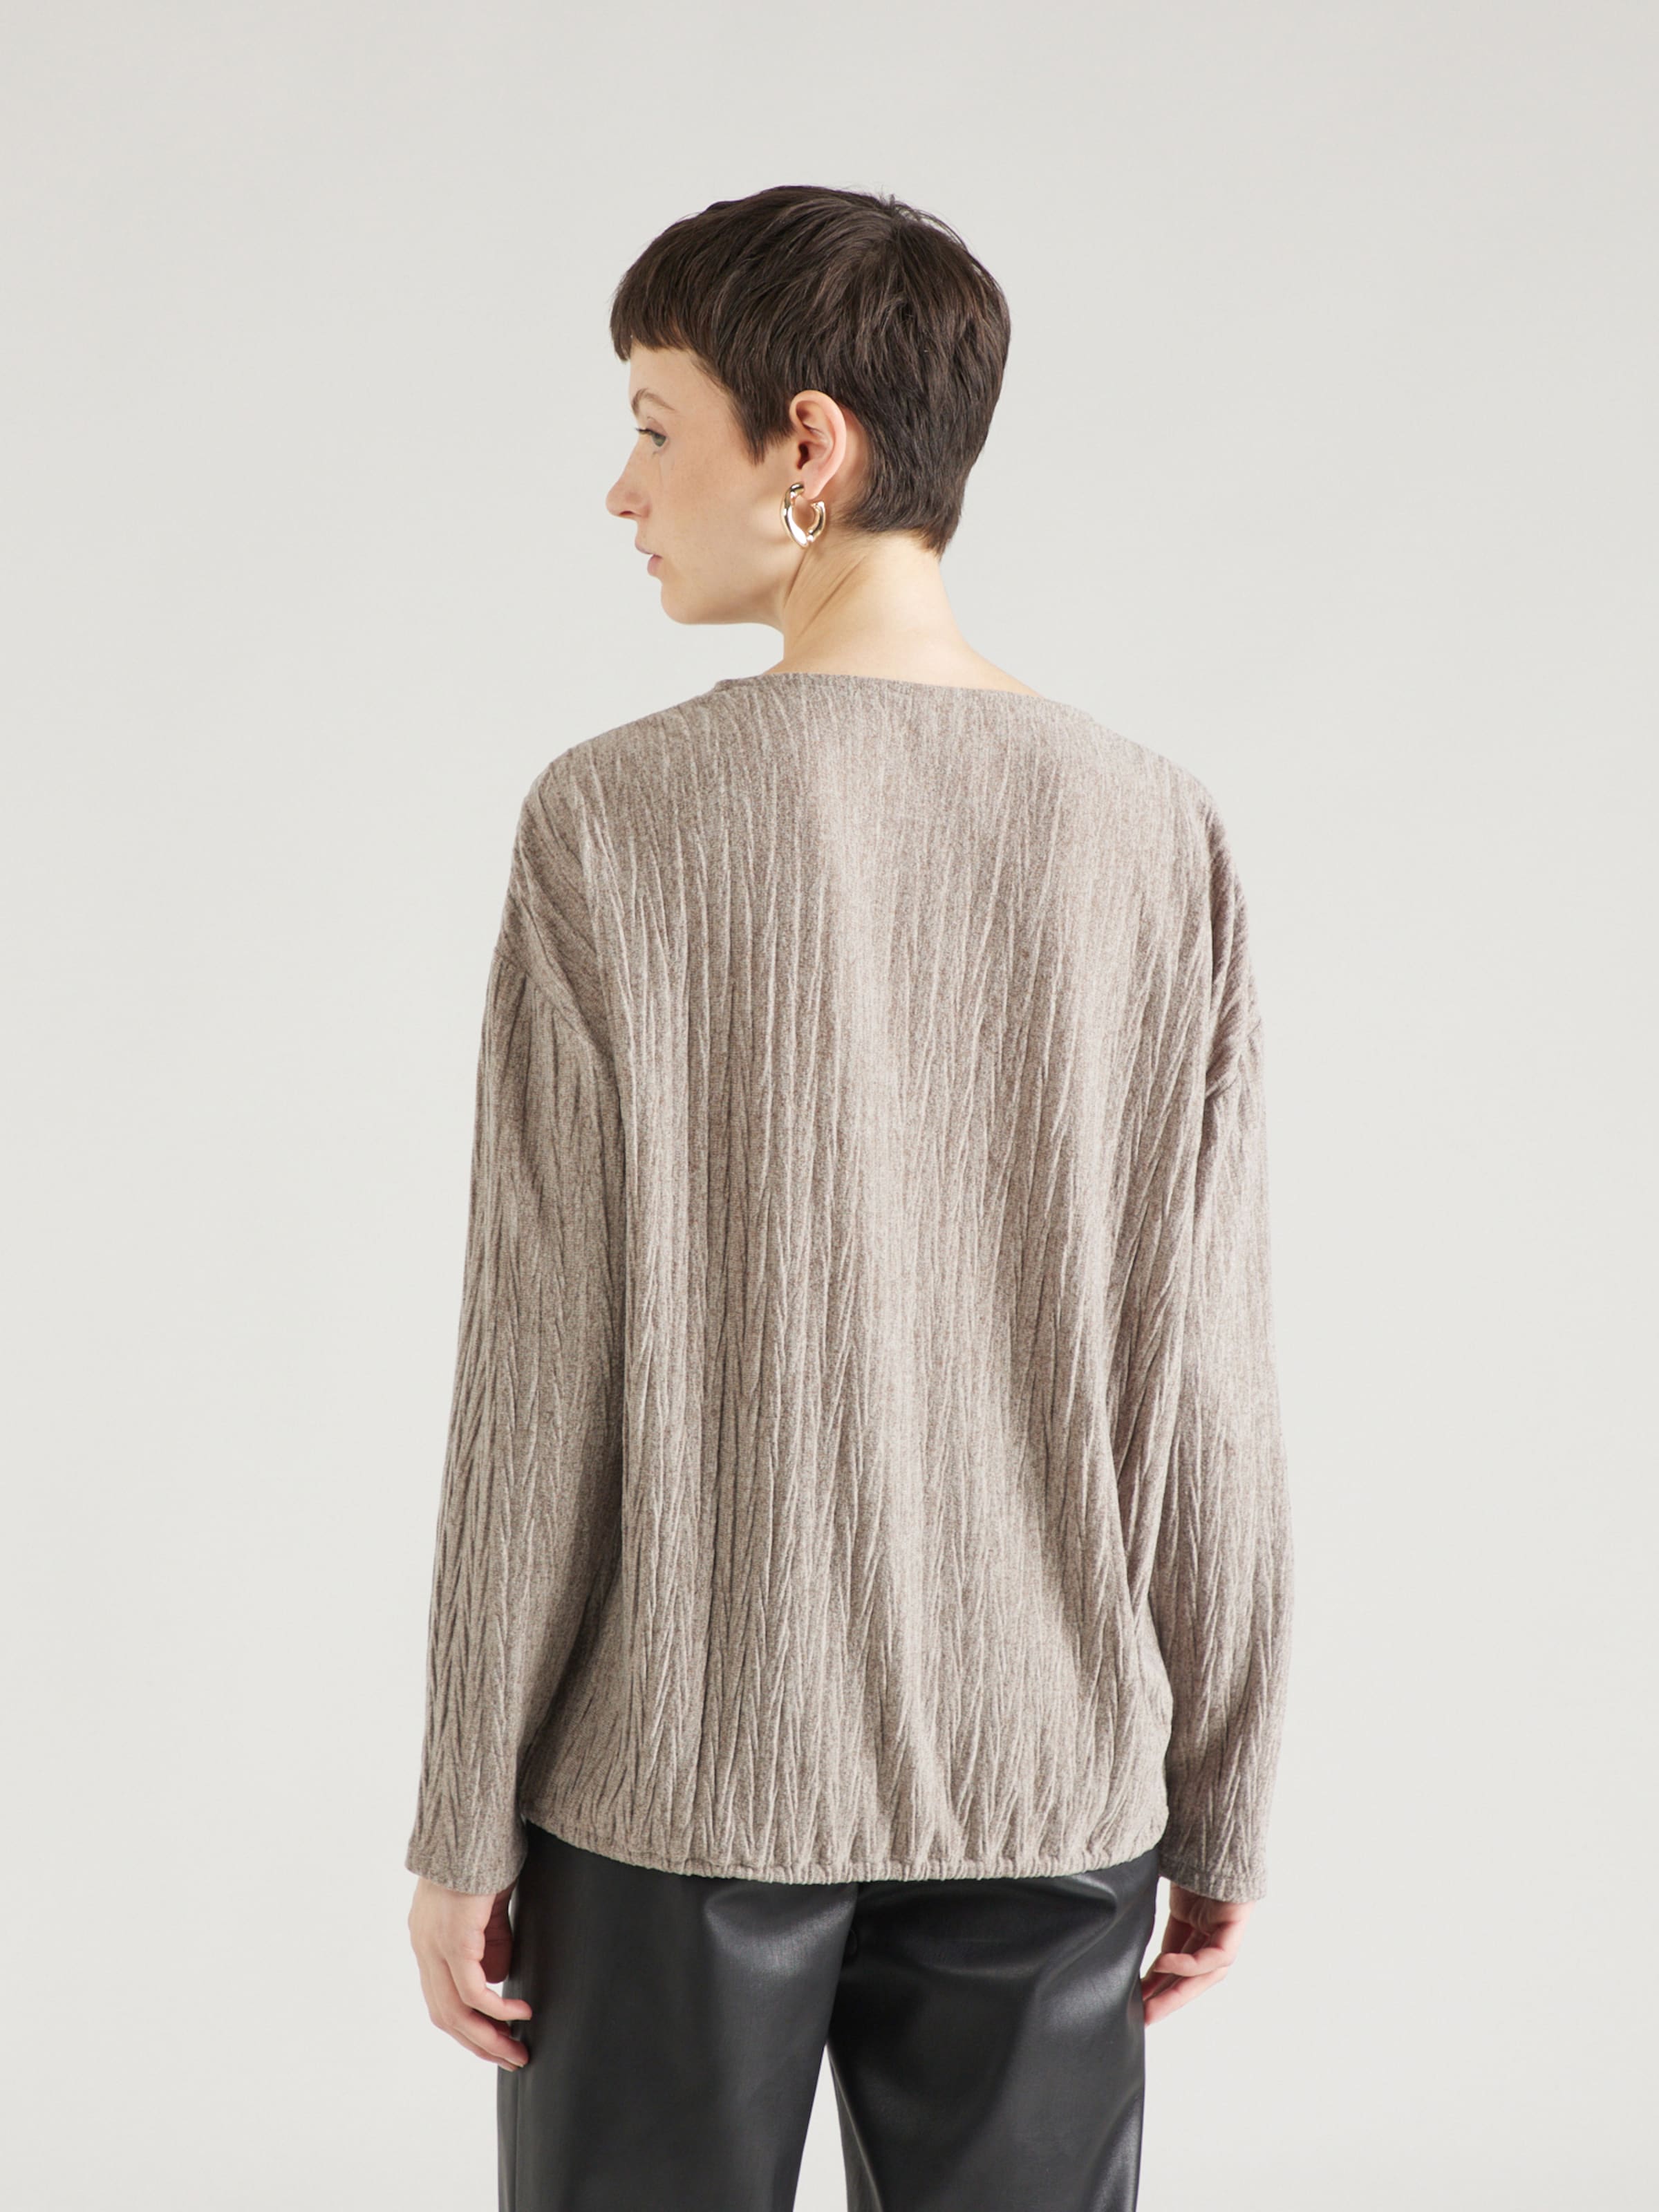 ZABAIONE Shirt 'Sa44nj' in Taupe | ABOUT YOU